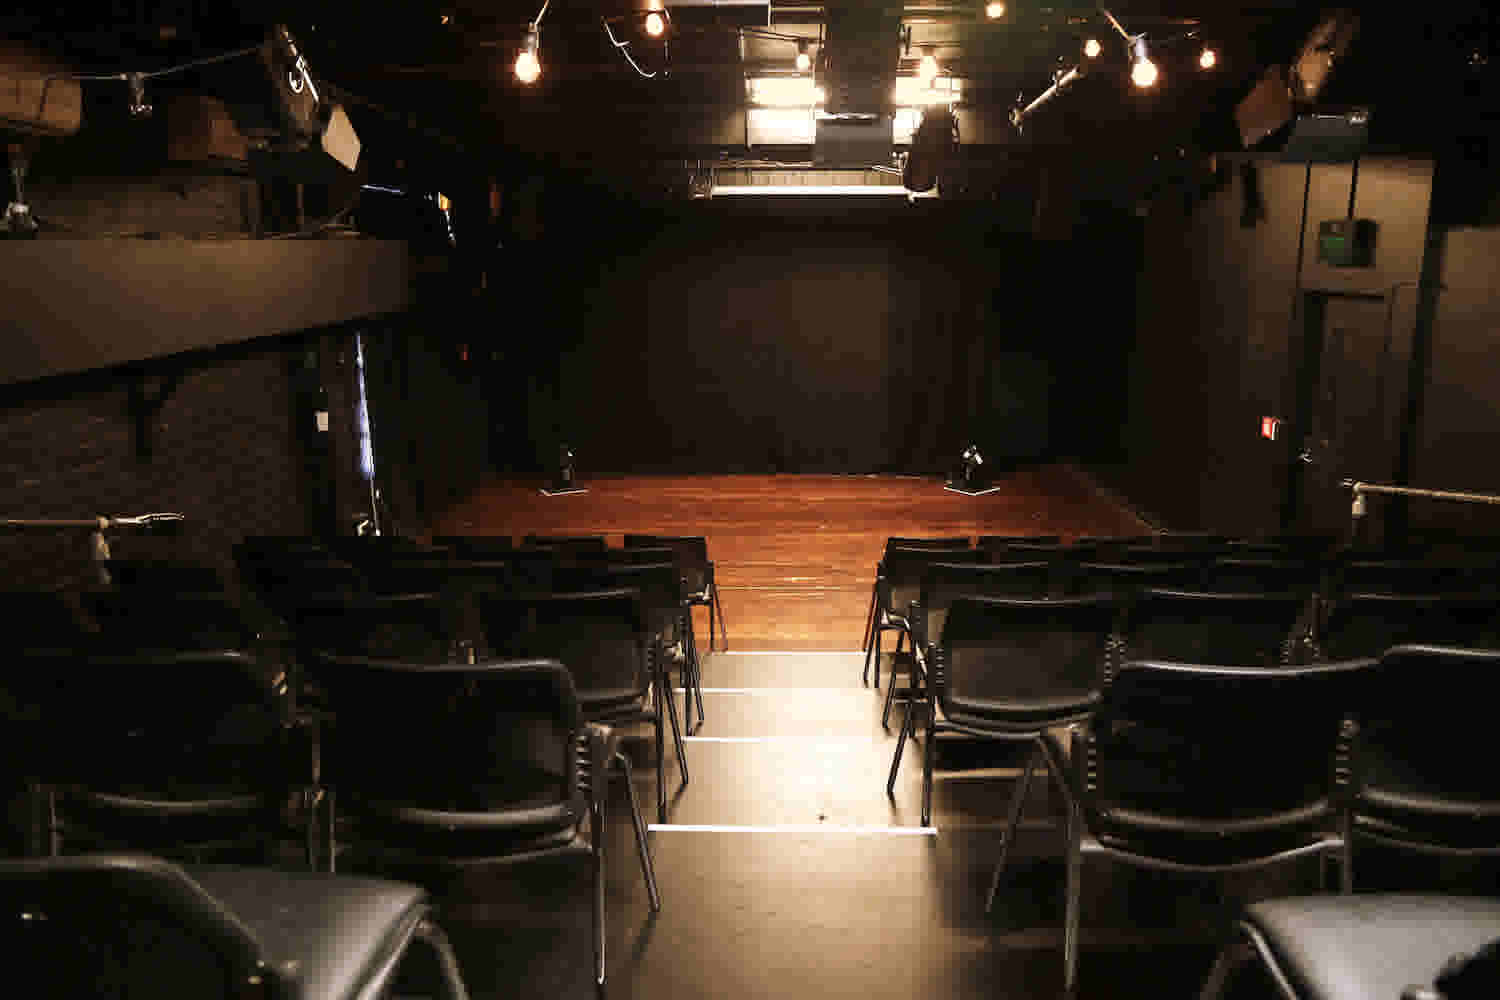 Basement Theatre's smaller Studio performance space showing the seating block and stage - taken from the back of the seating block. 